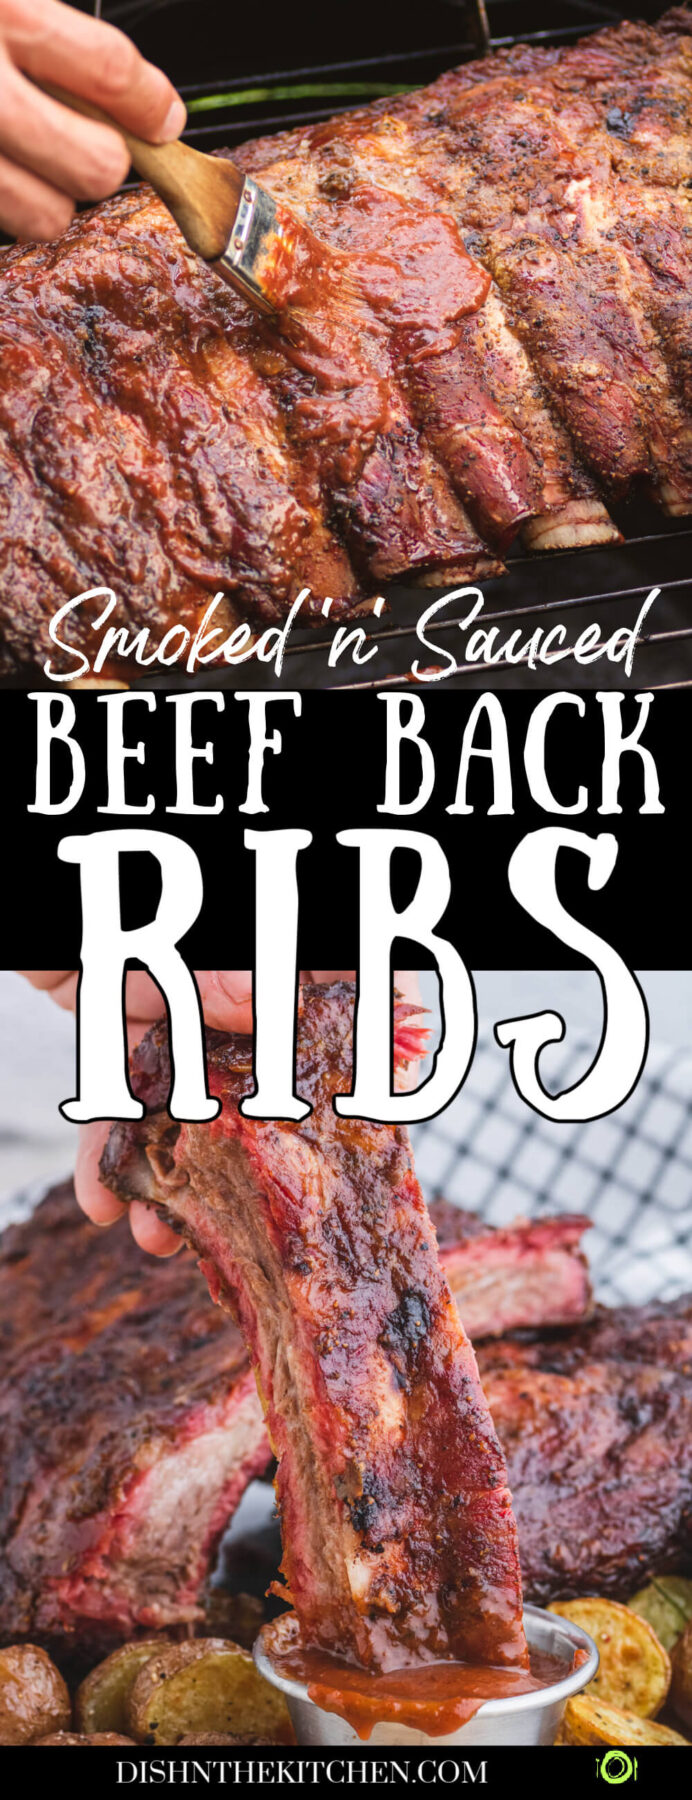 Pinterest image featuring a brush applying barbecue sauce to a rack of smoked beef ribs and another photo of a single beef rib being dipped in more barbecue sauce.